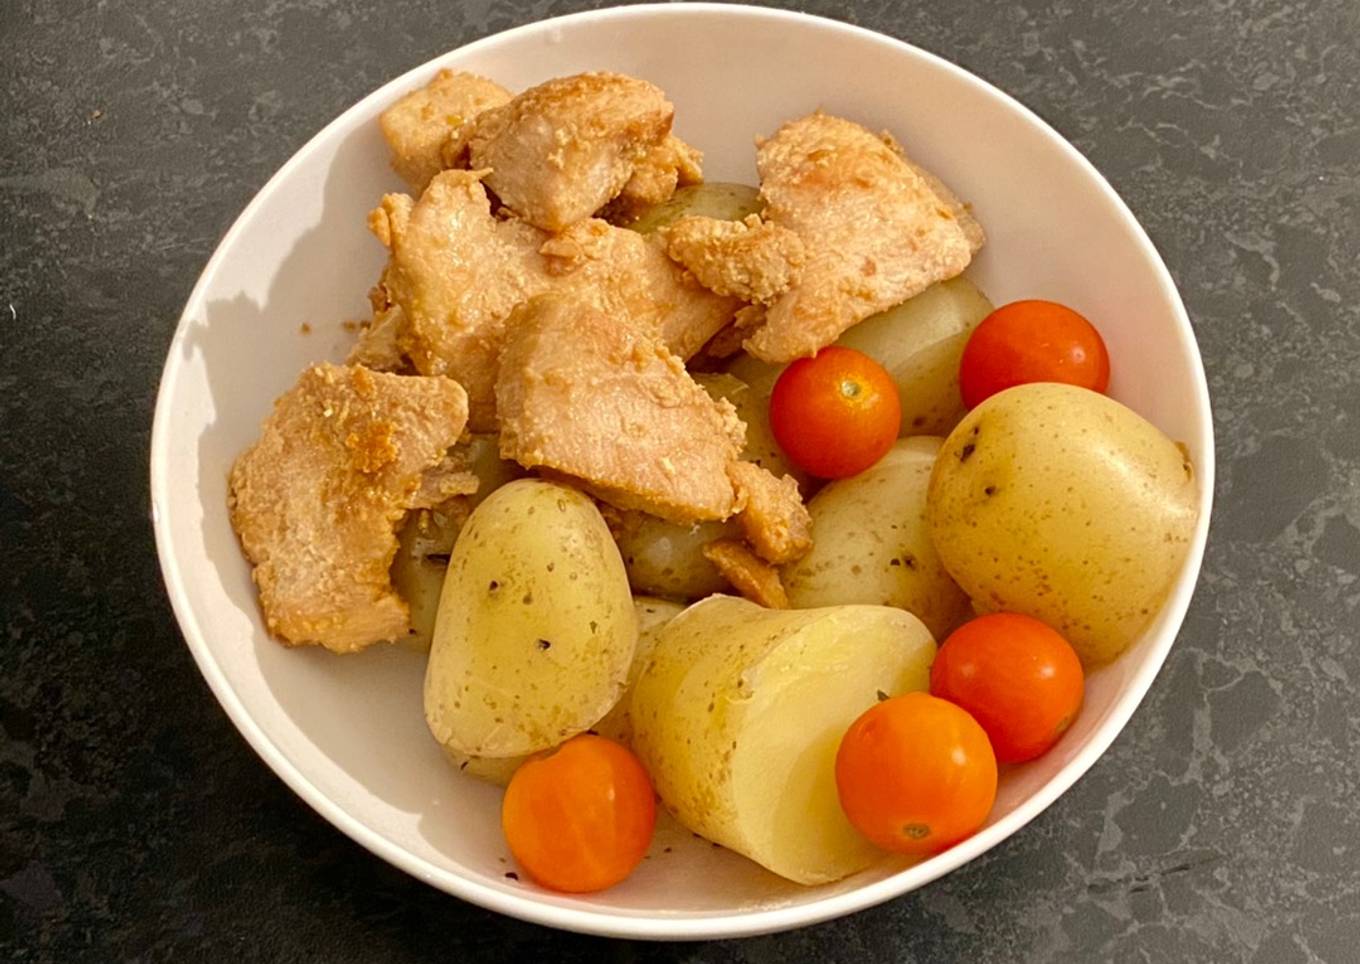 Jacket potatoes with chicken